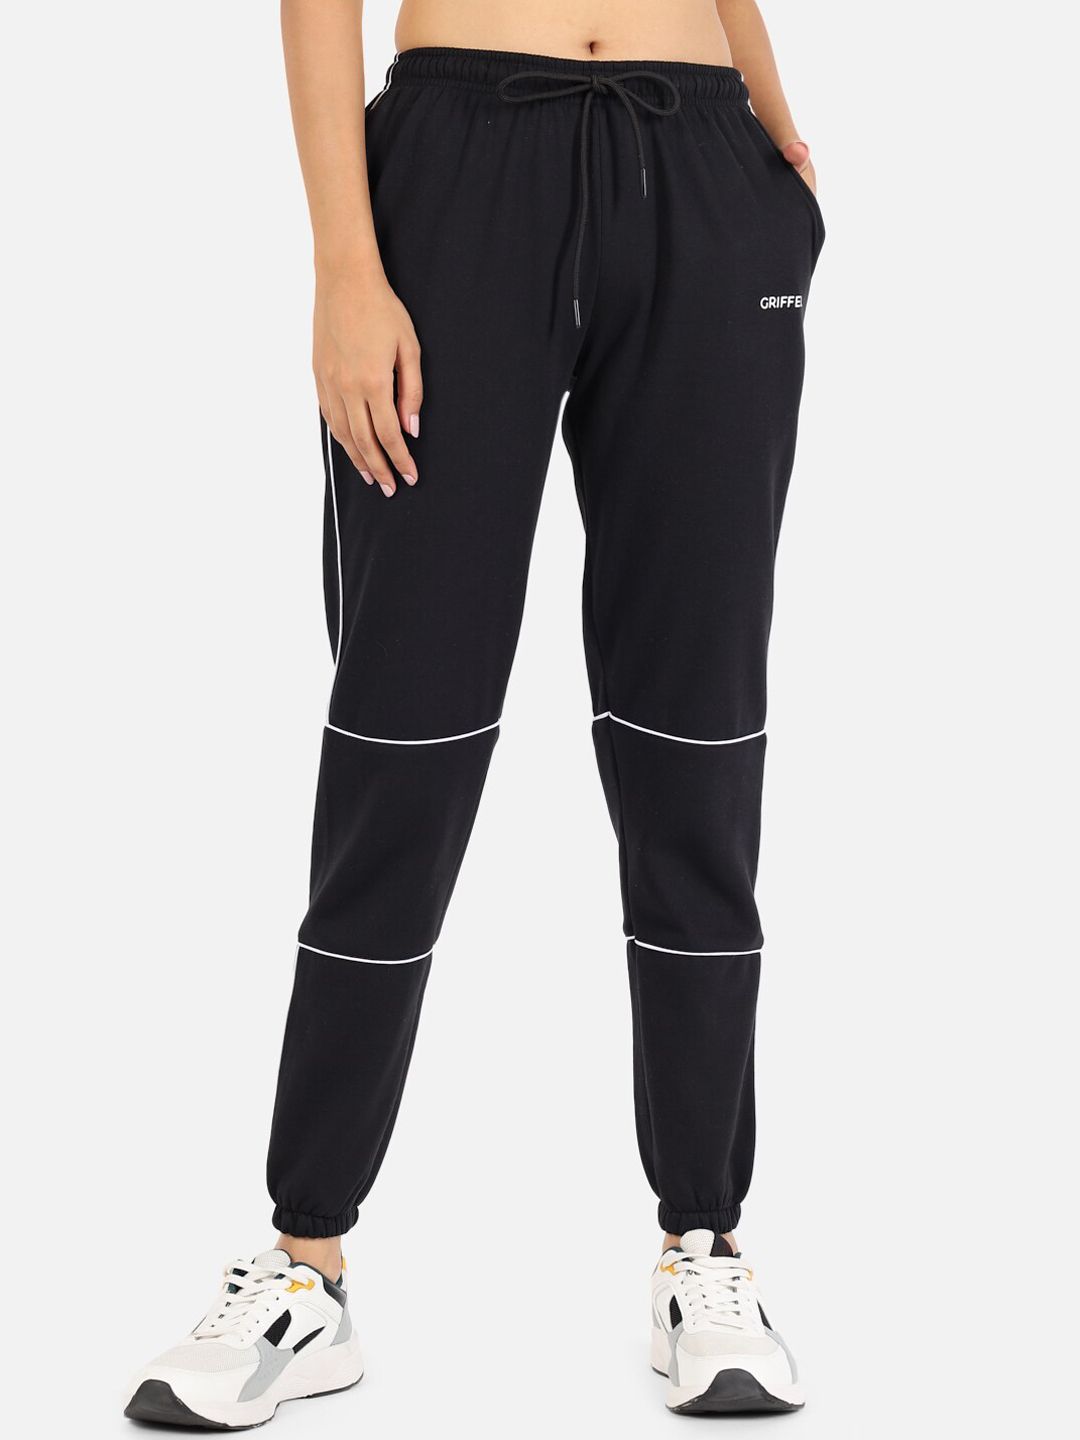 GRIFFEL Women Black Solid Cotton Joggers Price in India